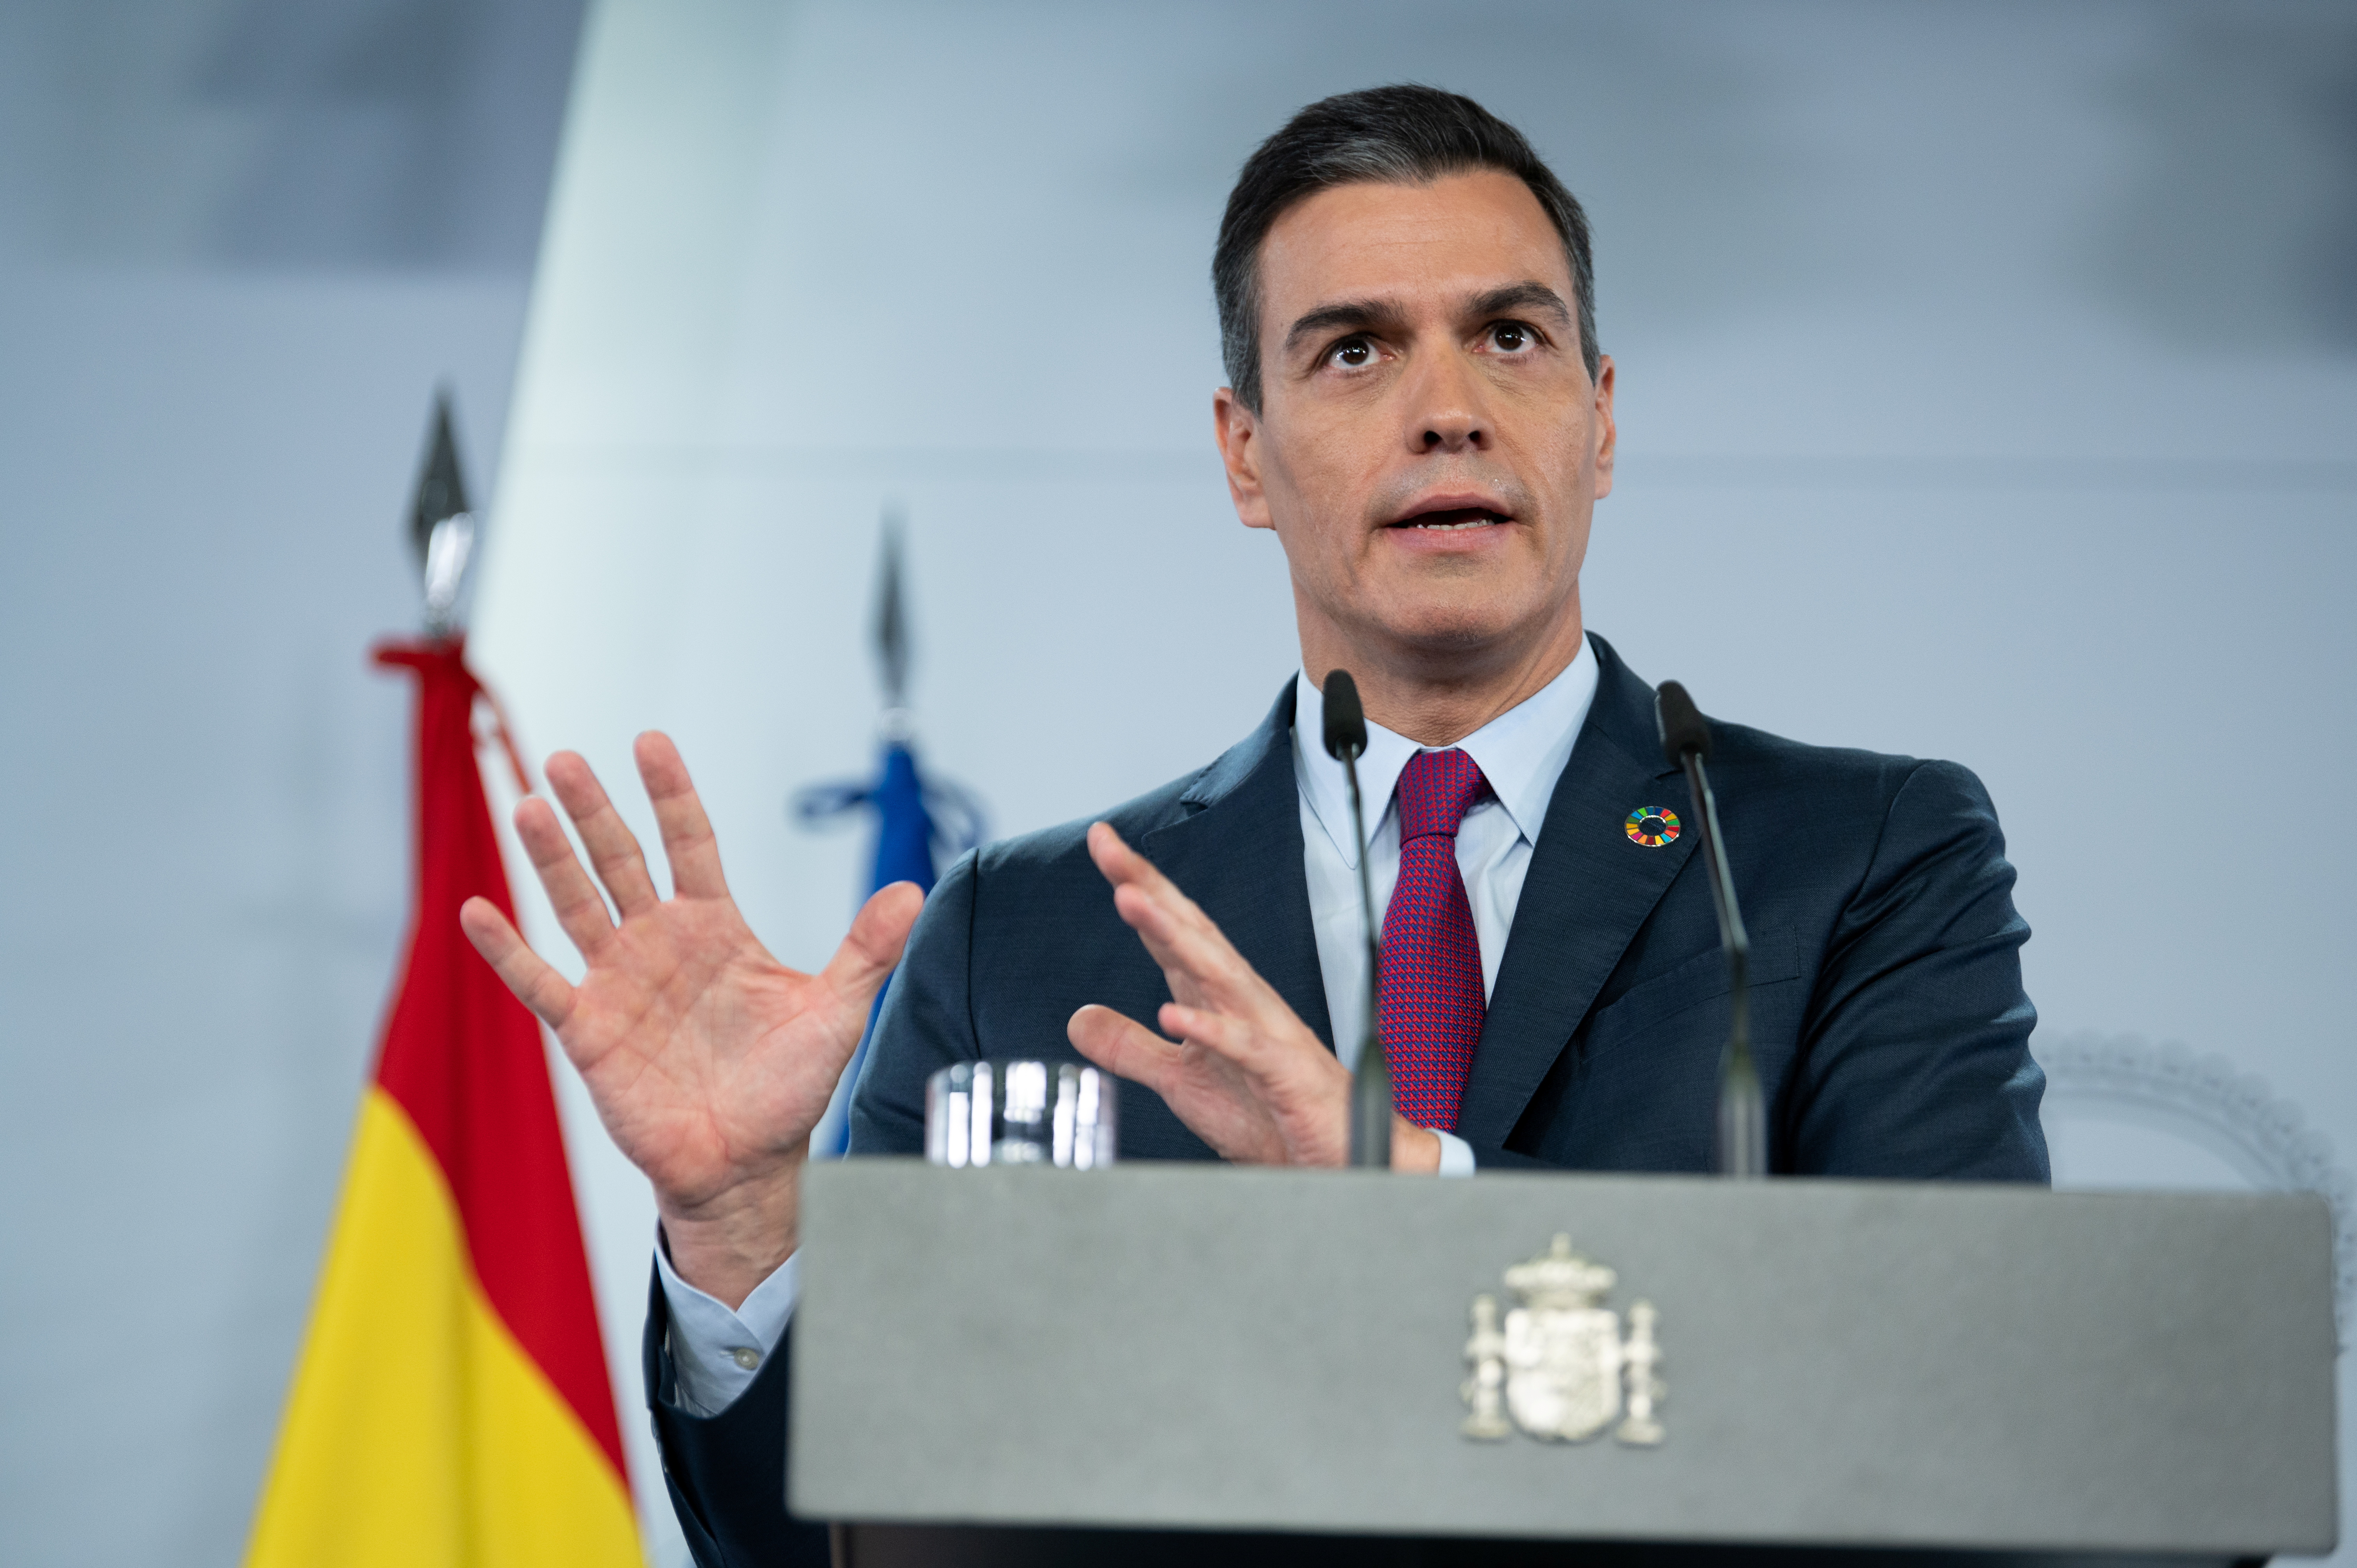 Spanish Prime Minister Pedro Sanchez speaks during a news conference at the Moncloa Palace in Madrid, Spain, November 22, 2020.  Moncloa Palace/Borja Puig de la Bellacasa/Handout via REUTERS ATTENTION EDITORS -THIS IMAGE HAS BEEN SUPPLIED BY A THIRD PARTY. NO RESALES. NO ARCHIVES